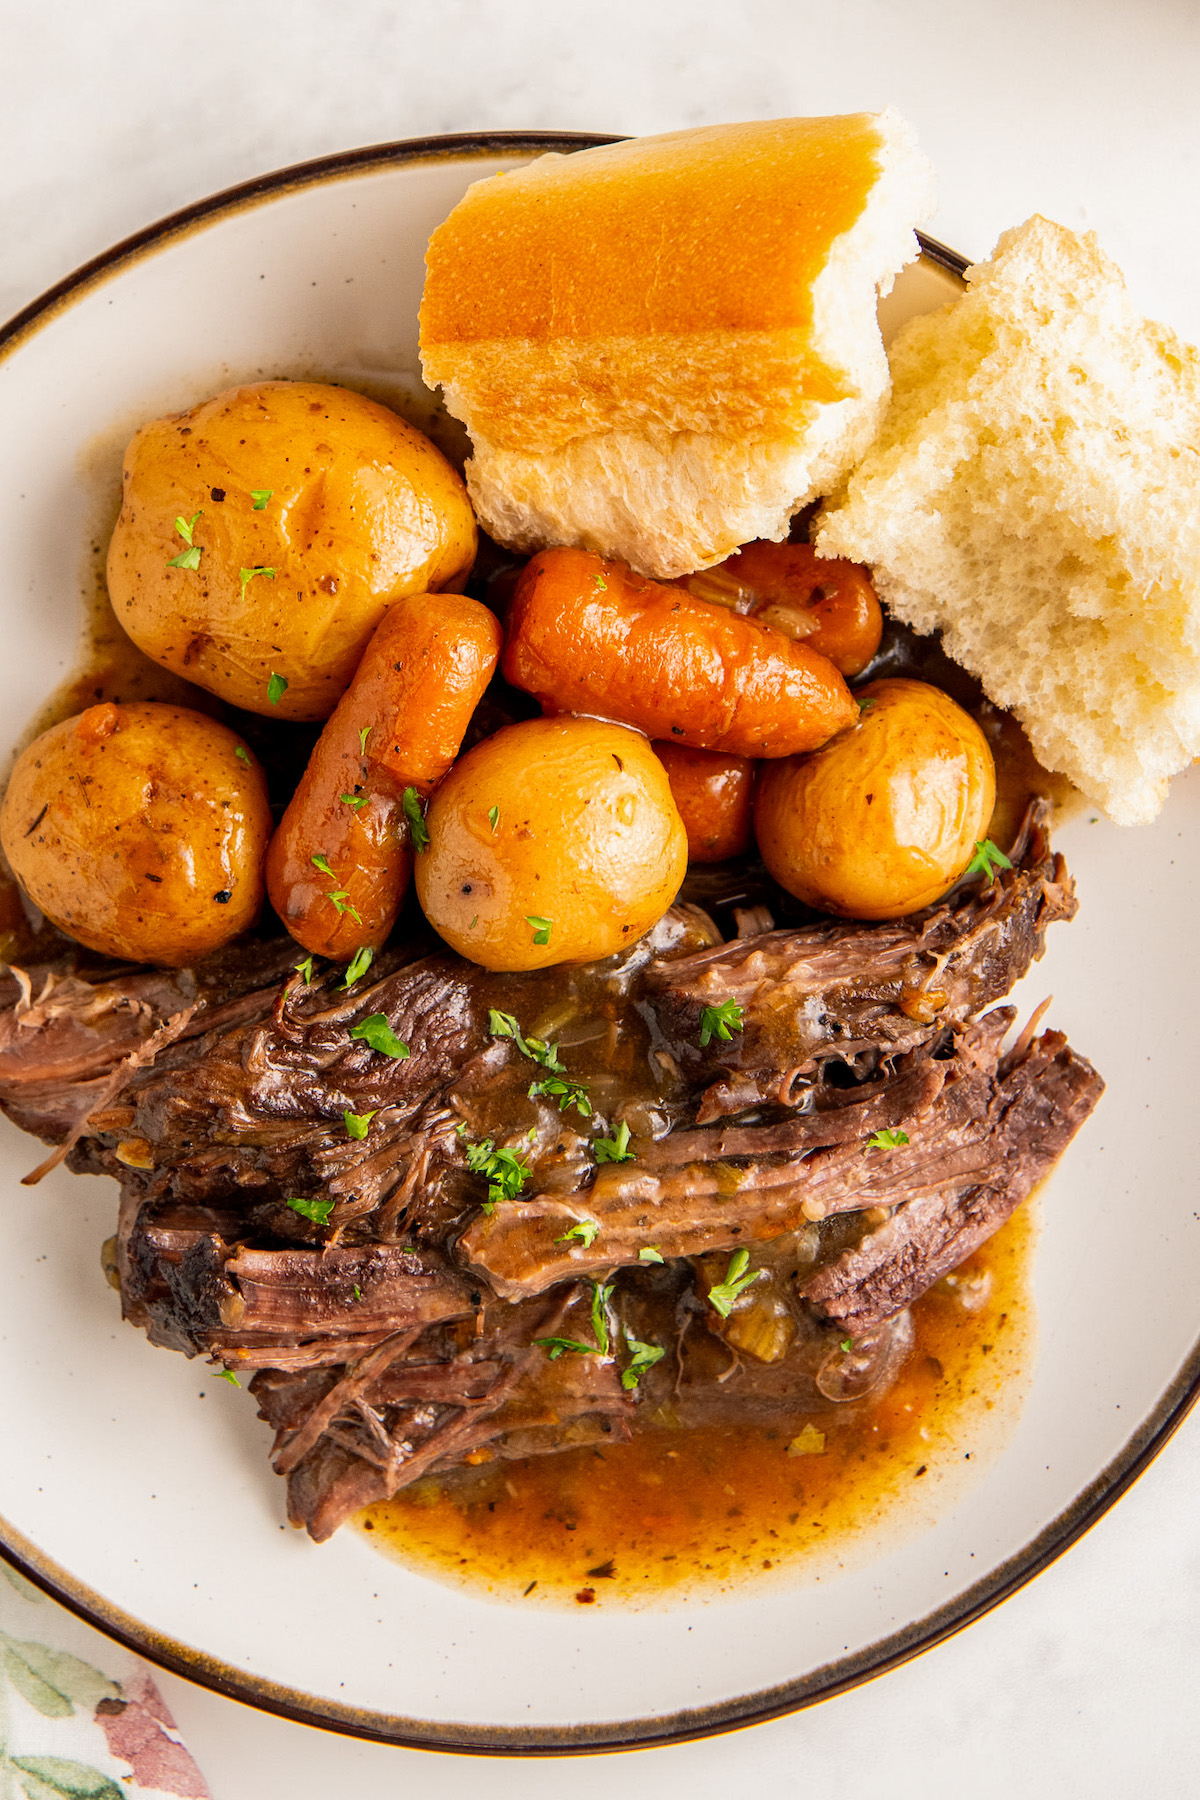 Juicy and tender instant pot roast with potatoes and carrots in a rich and savory beef gravy on a plate with a side of crusty bread.